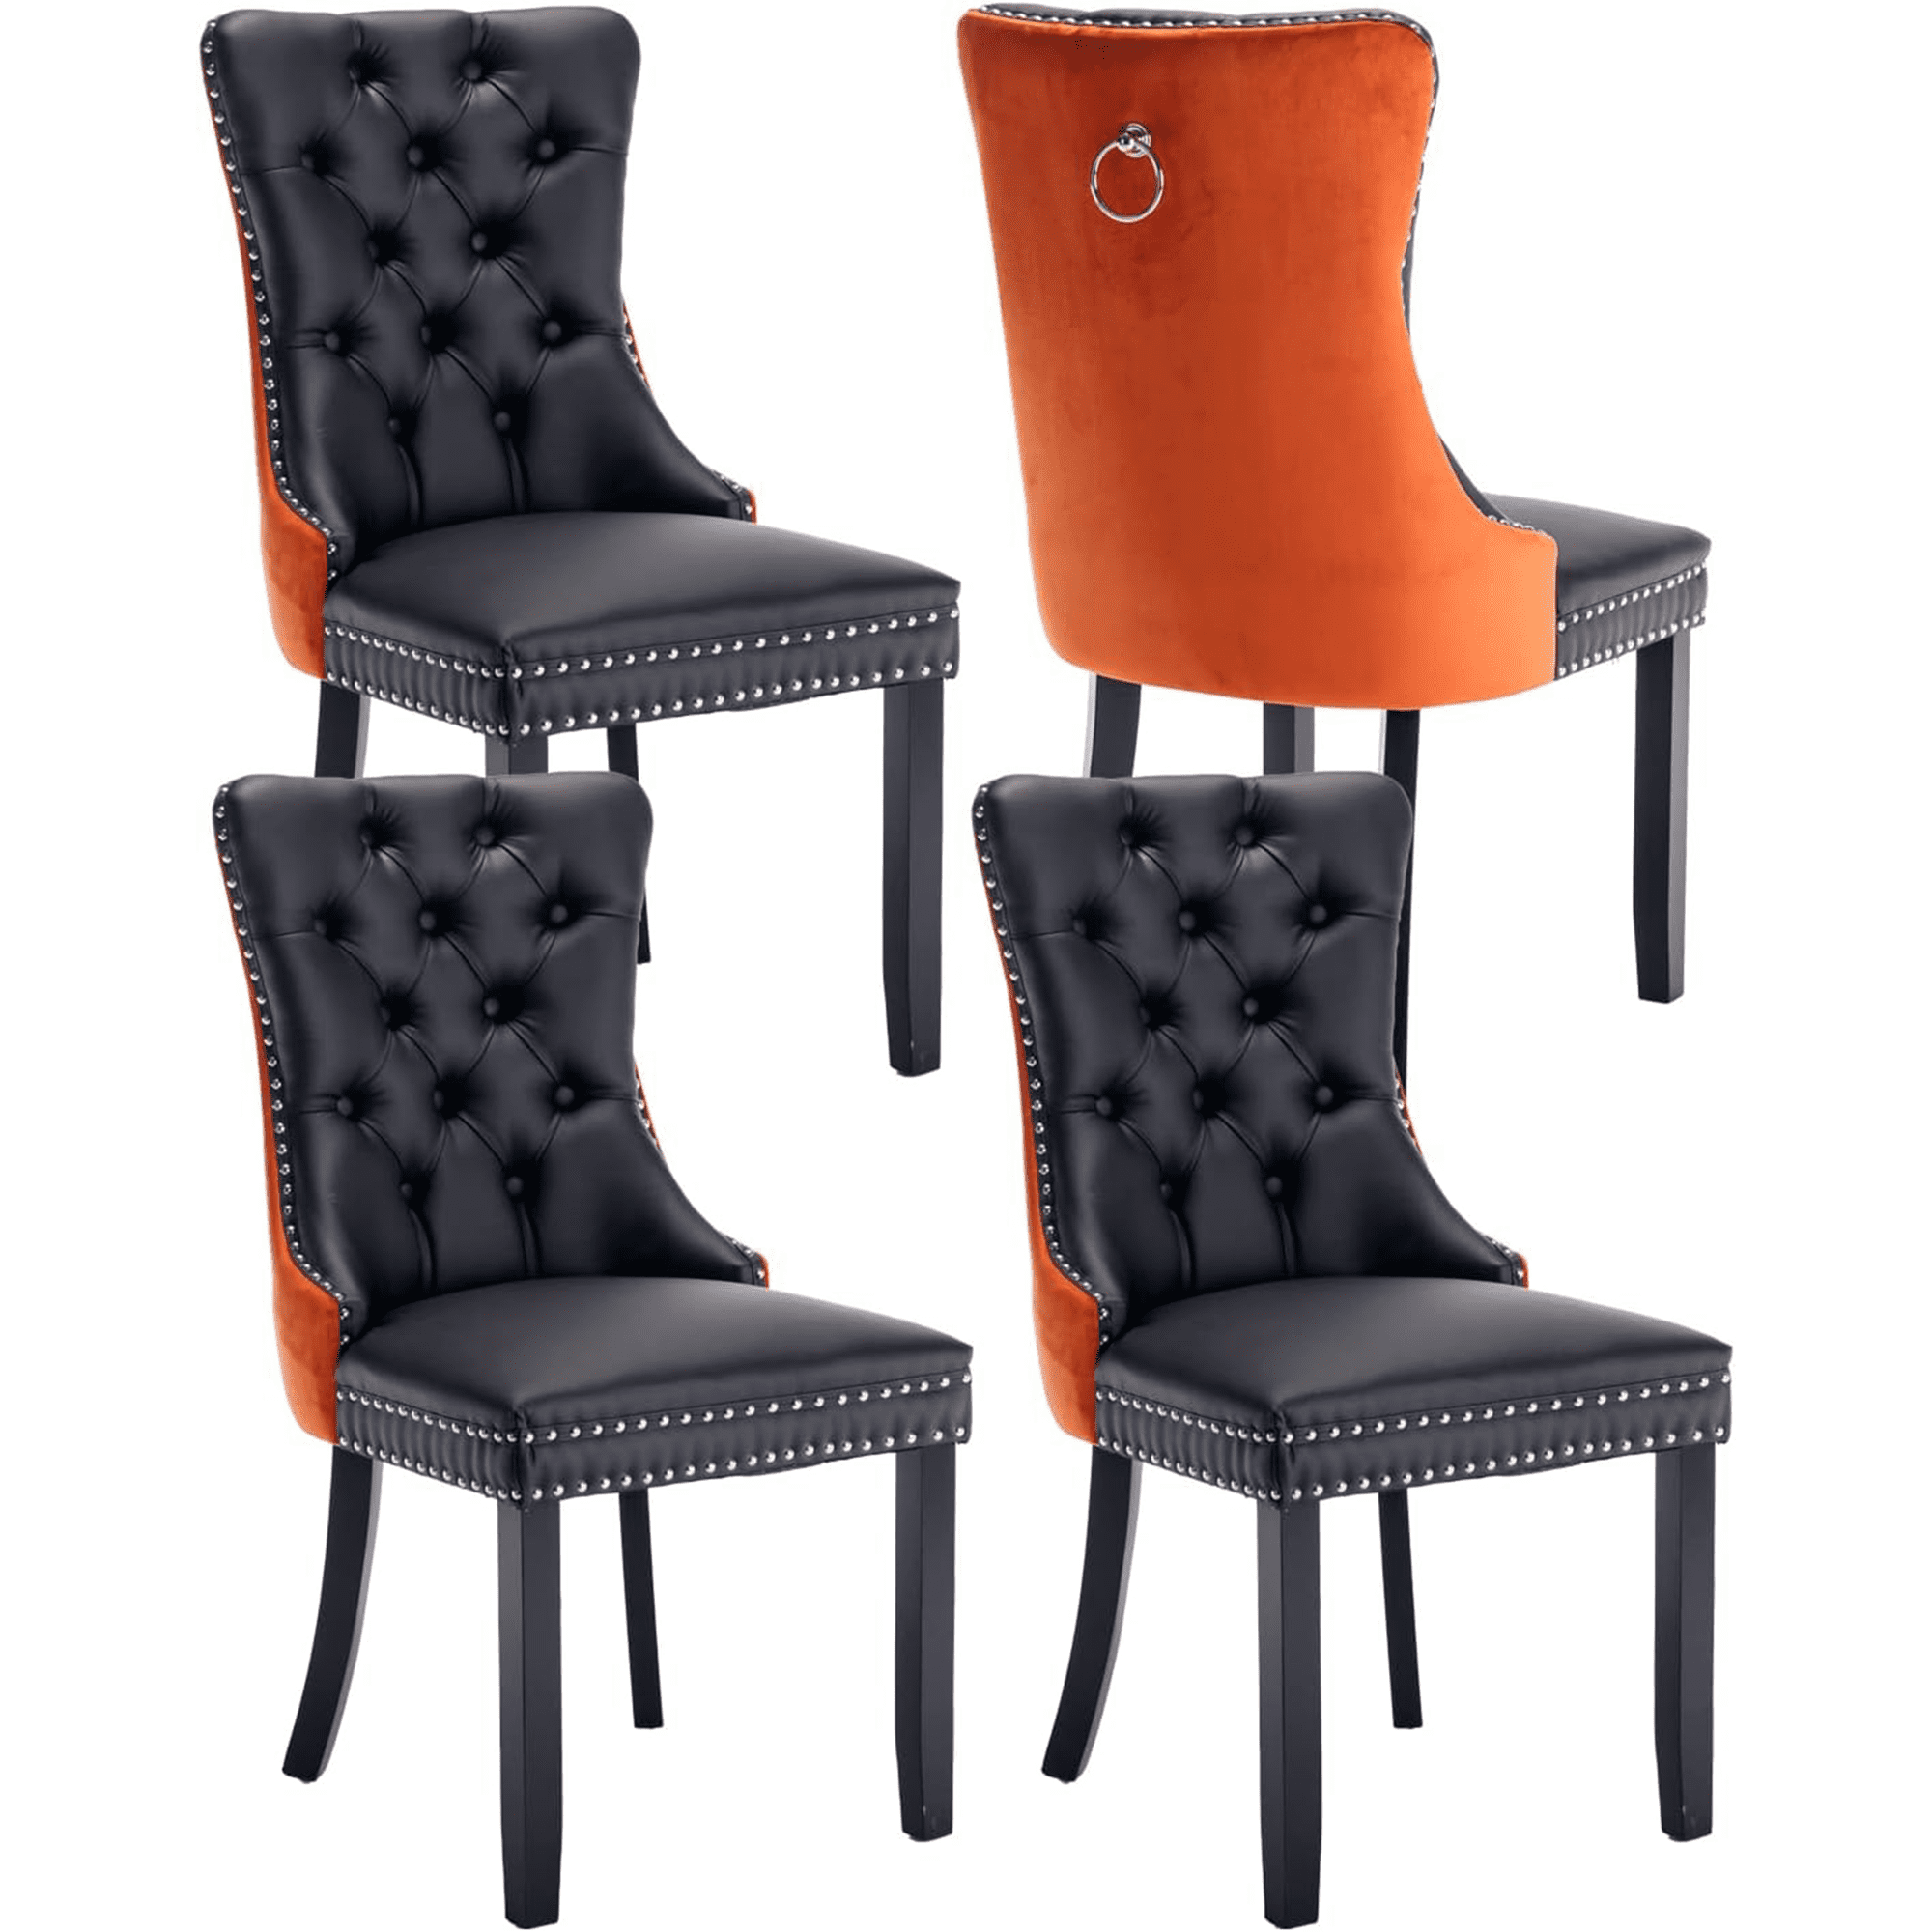 Expertly Crafted Leather Dining Room Chairs Elegant and Extremely